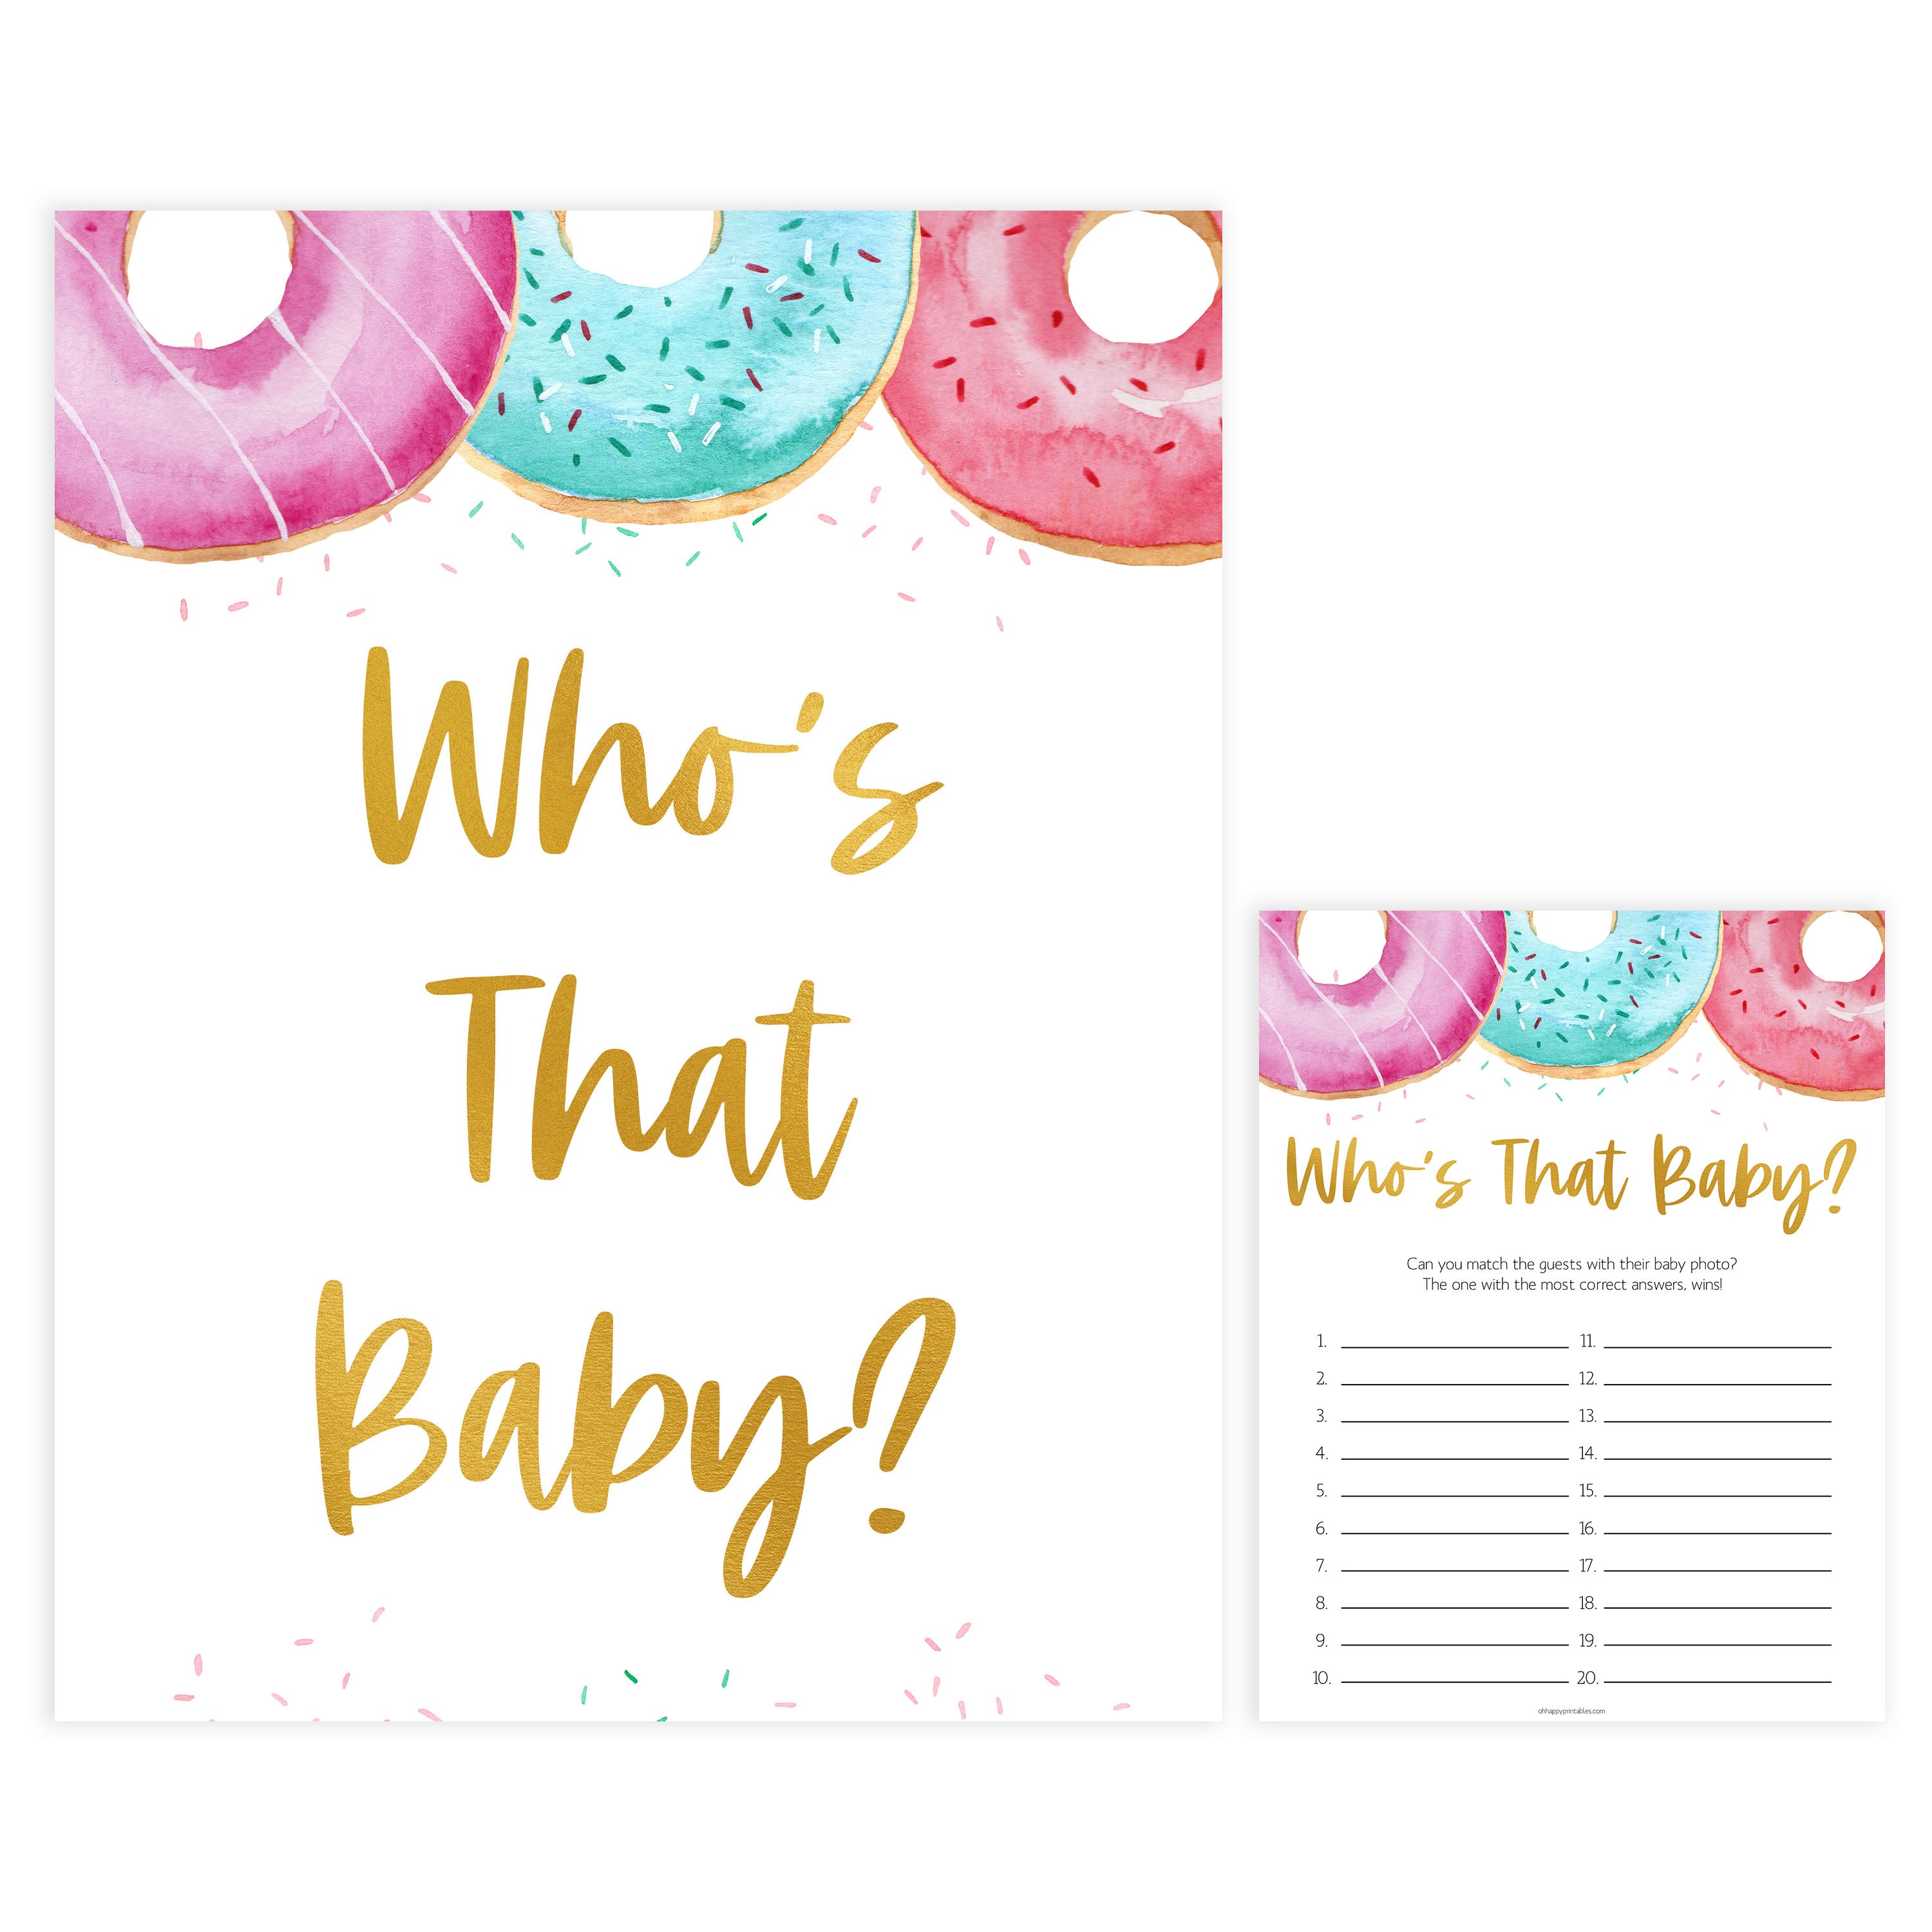 who's that baby game, Printable baby shower games, donut baby games, baby shower games, fun baby shower ideas, top baby shower ideas, donut sprinkles baby shower, baby shower games, fun donut baby shower ideas